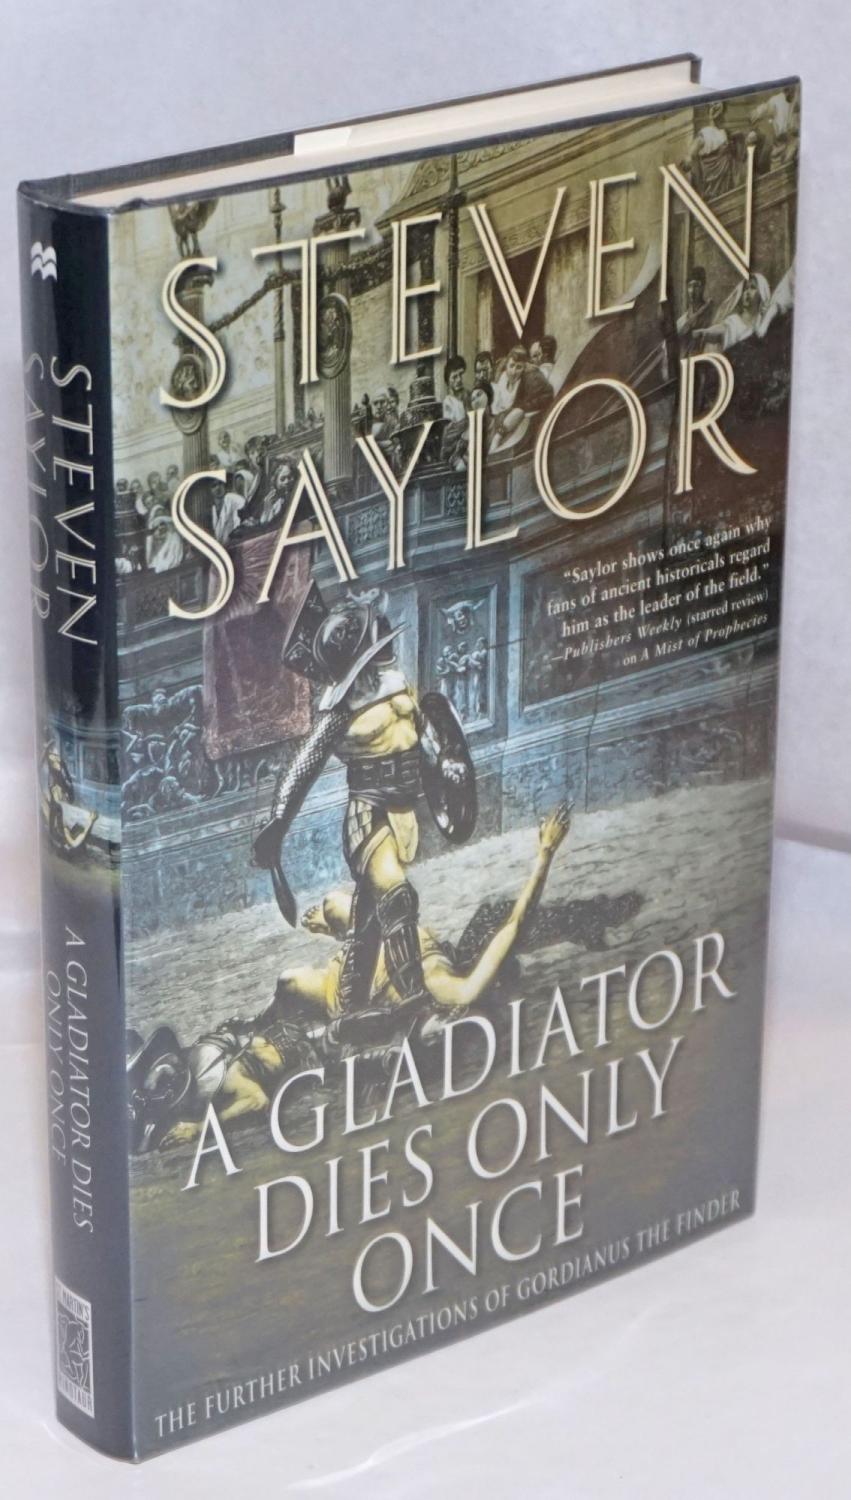 A Gladiator Dies Only Once: the further investigations of Gordianus the Finder - Saylor, Steven [aka Aaron Travis]